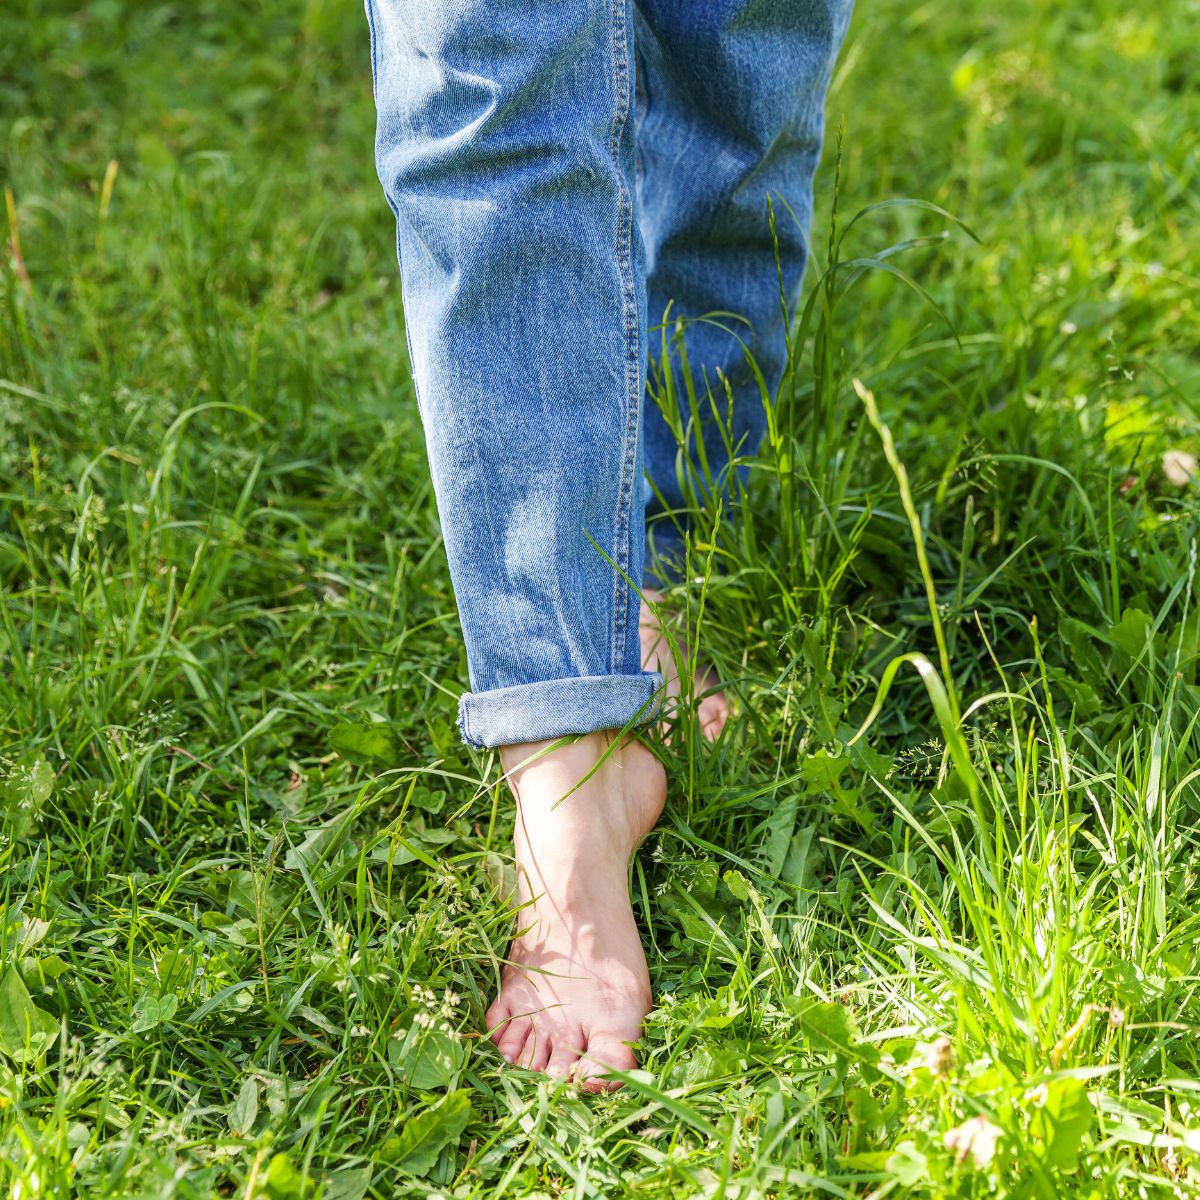 How To Get Grass Stains Out Of Jeans: Tips and Tricks